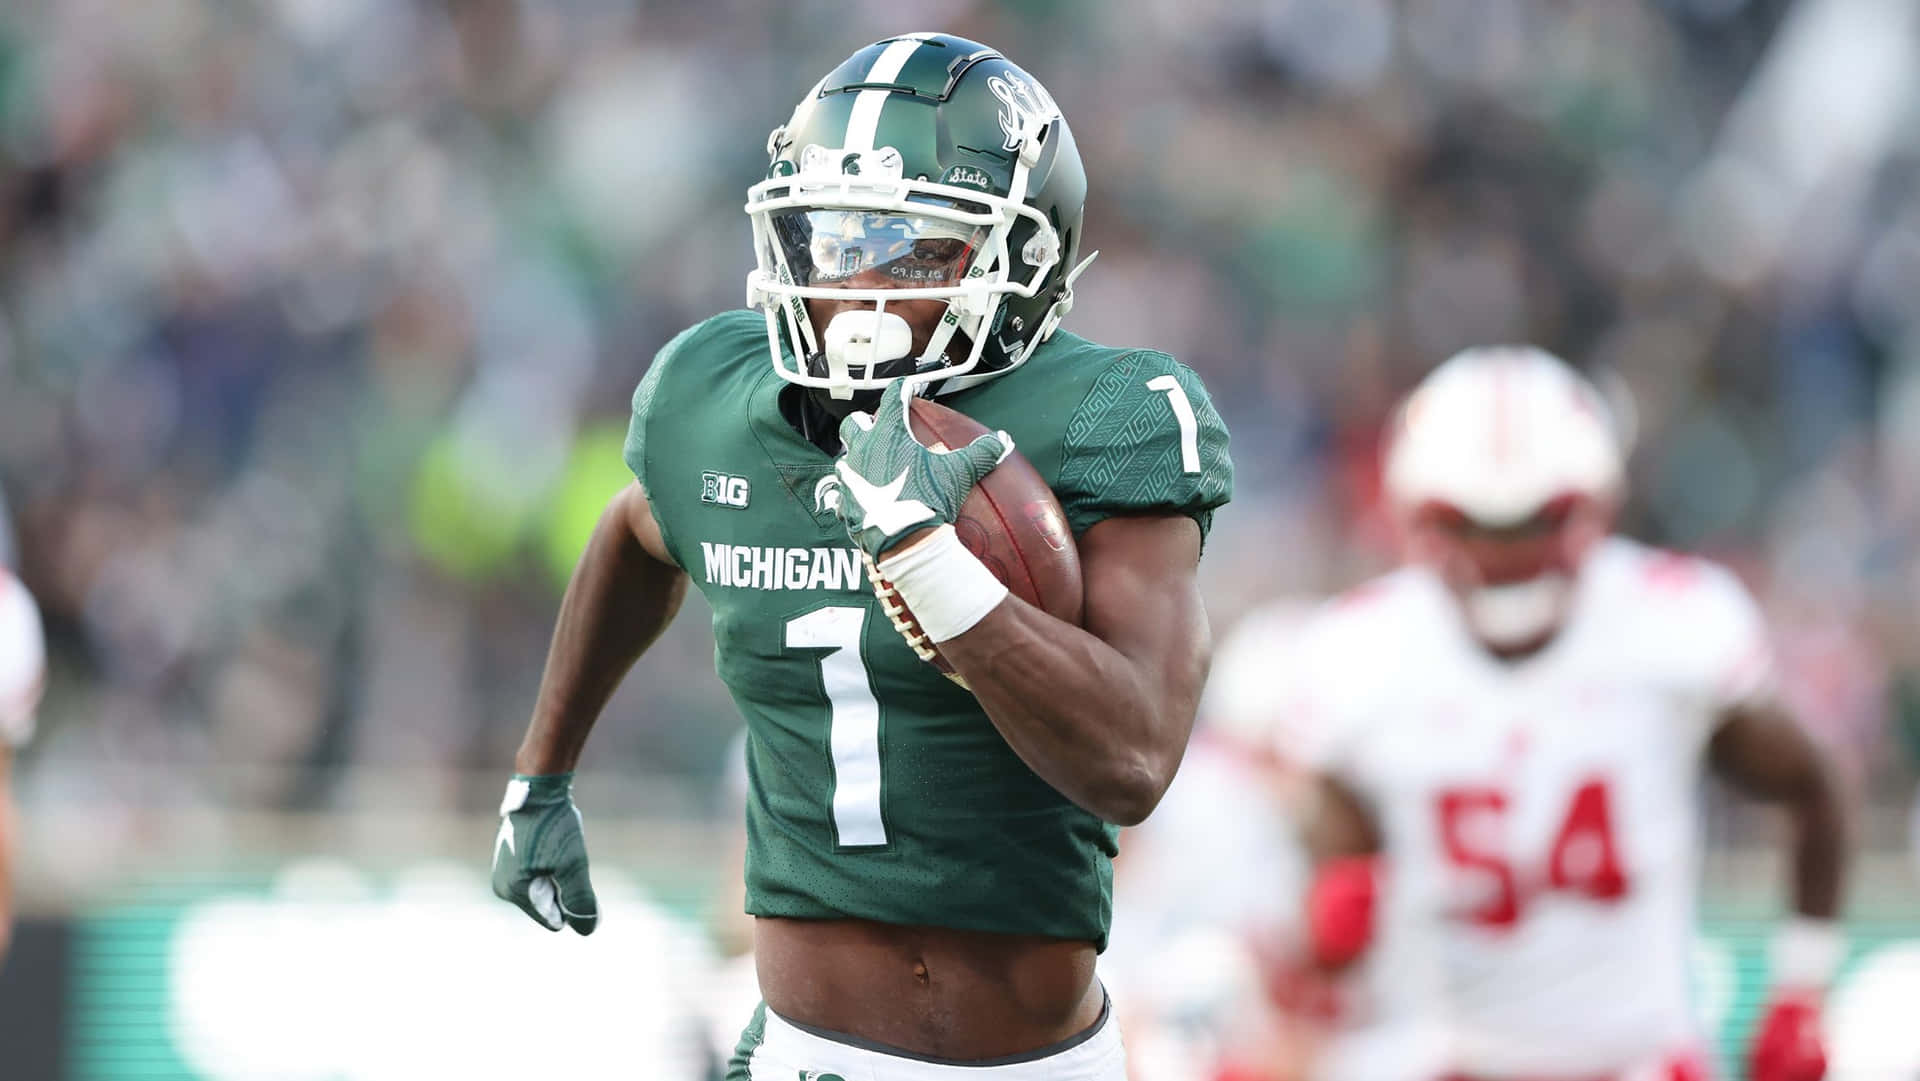 Michigan State Football Player Number1 Wallpaper